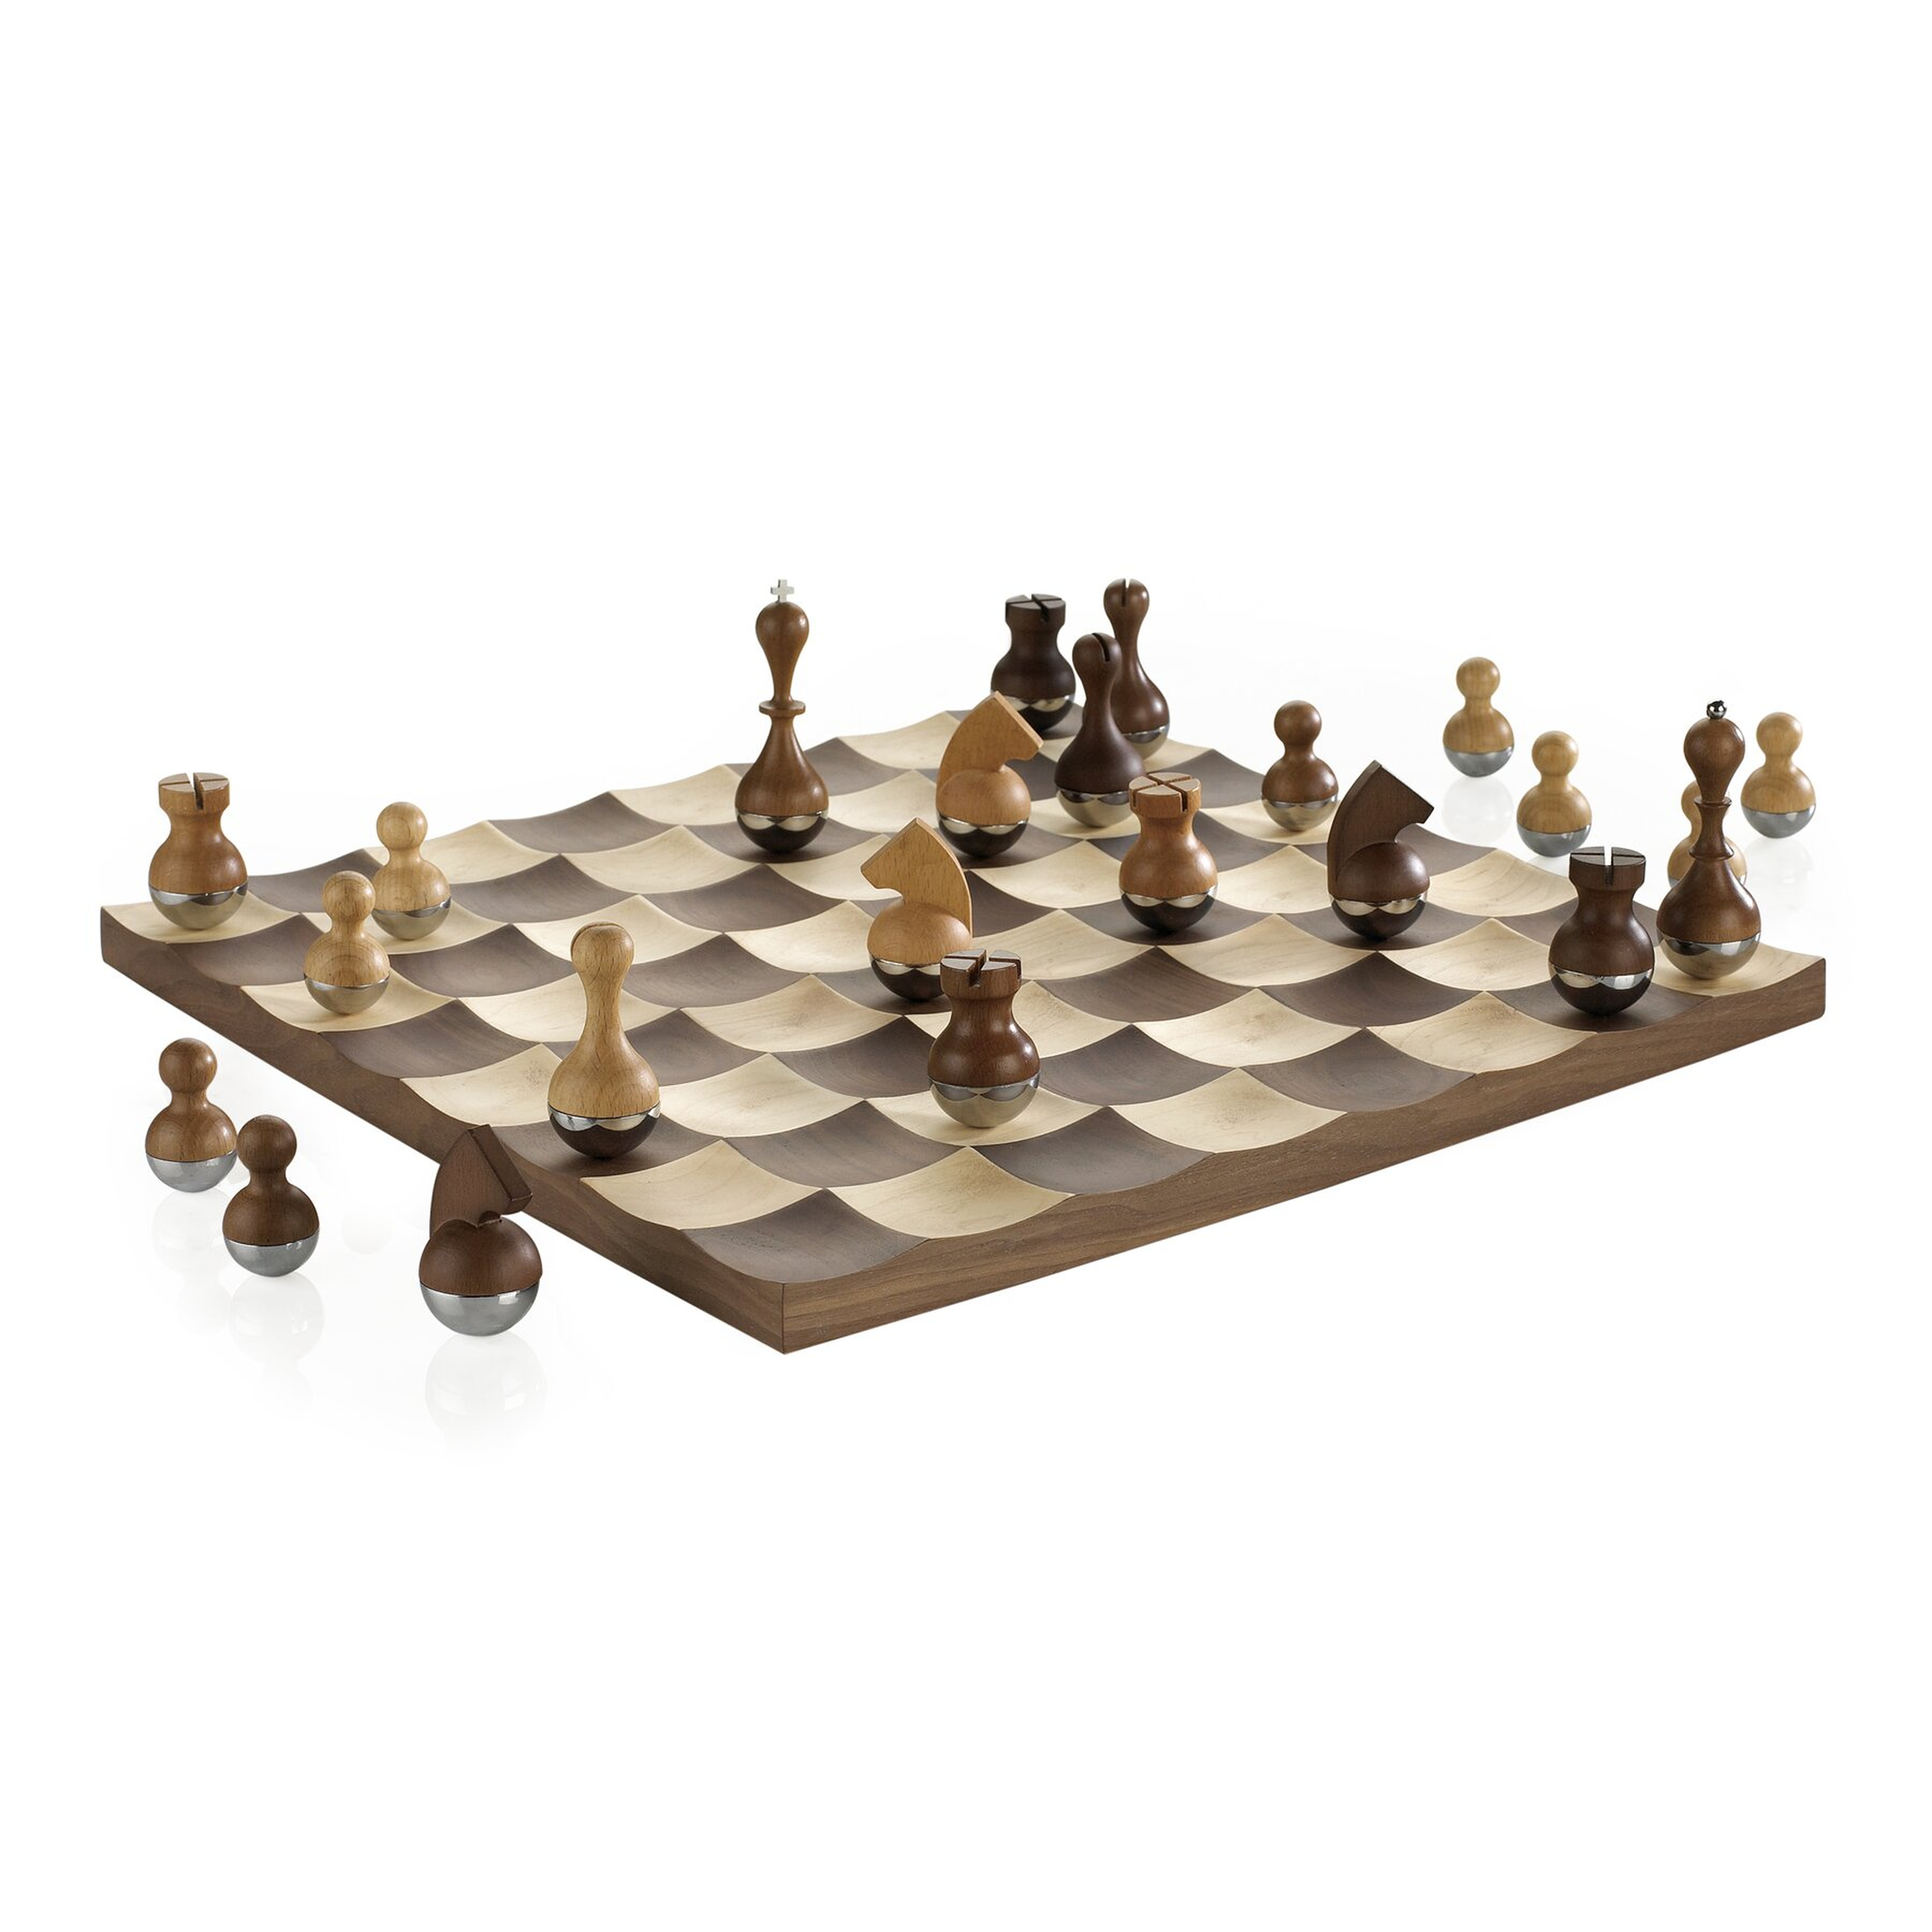 Wobbly Brown Chess Board Game - Wayfair